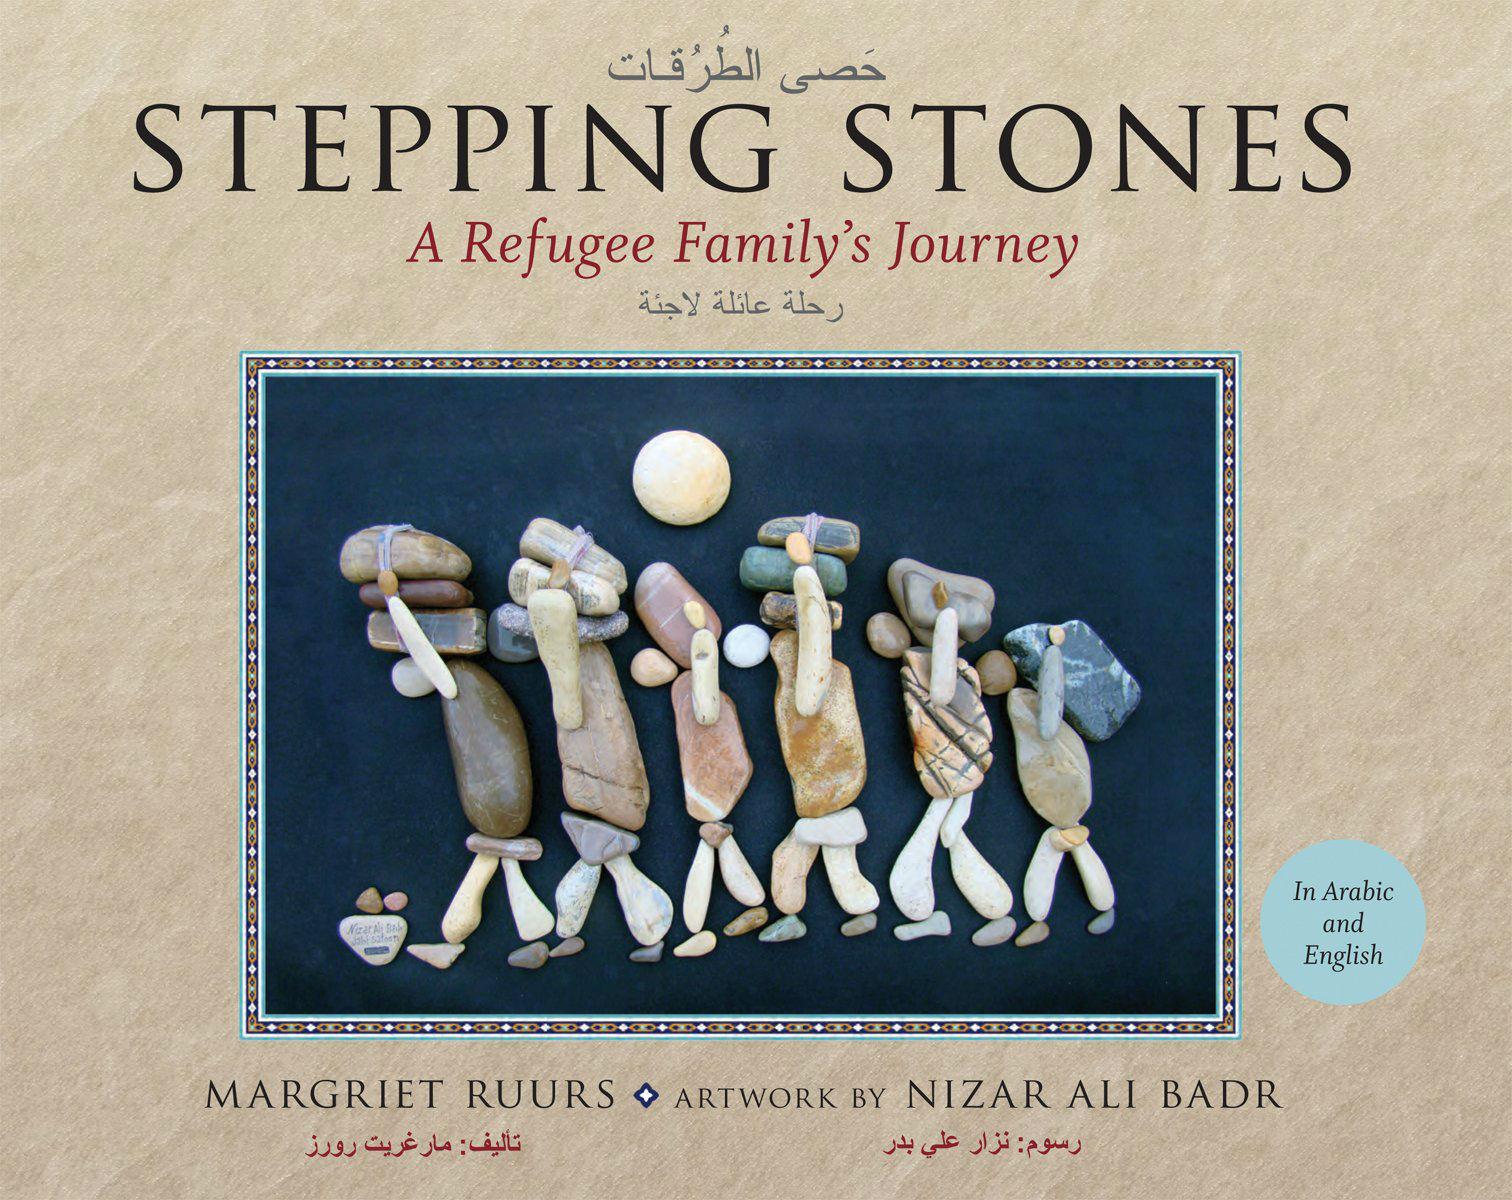 &#13;
Canadian children’s author Margriet Ruurs follows a family fleeing war in an unnamed country and features images by Syrian artist Nizar Ali Badr&#13;